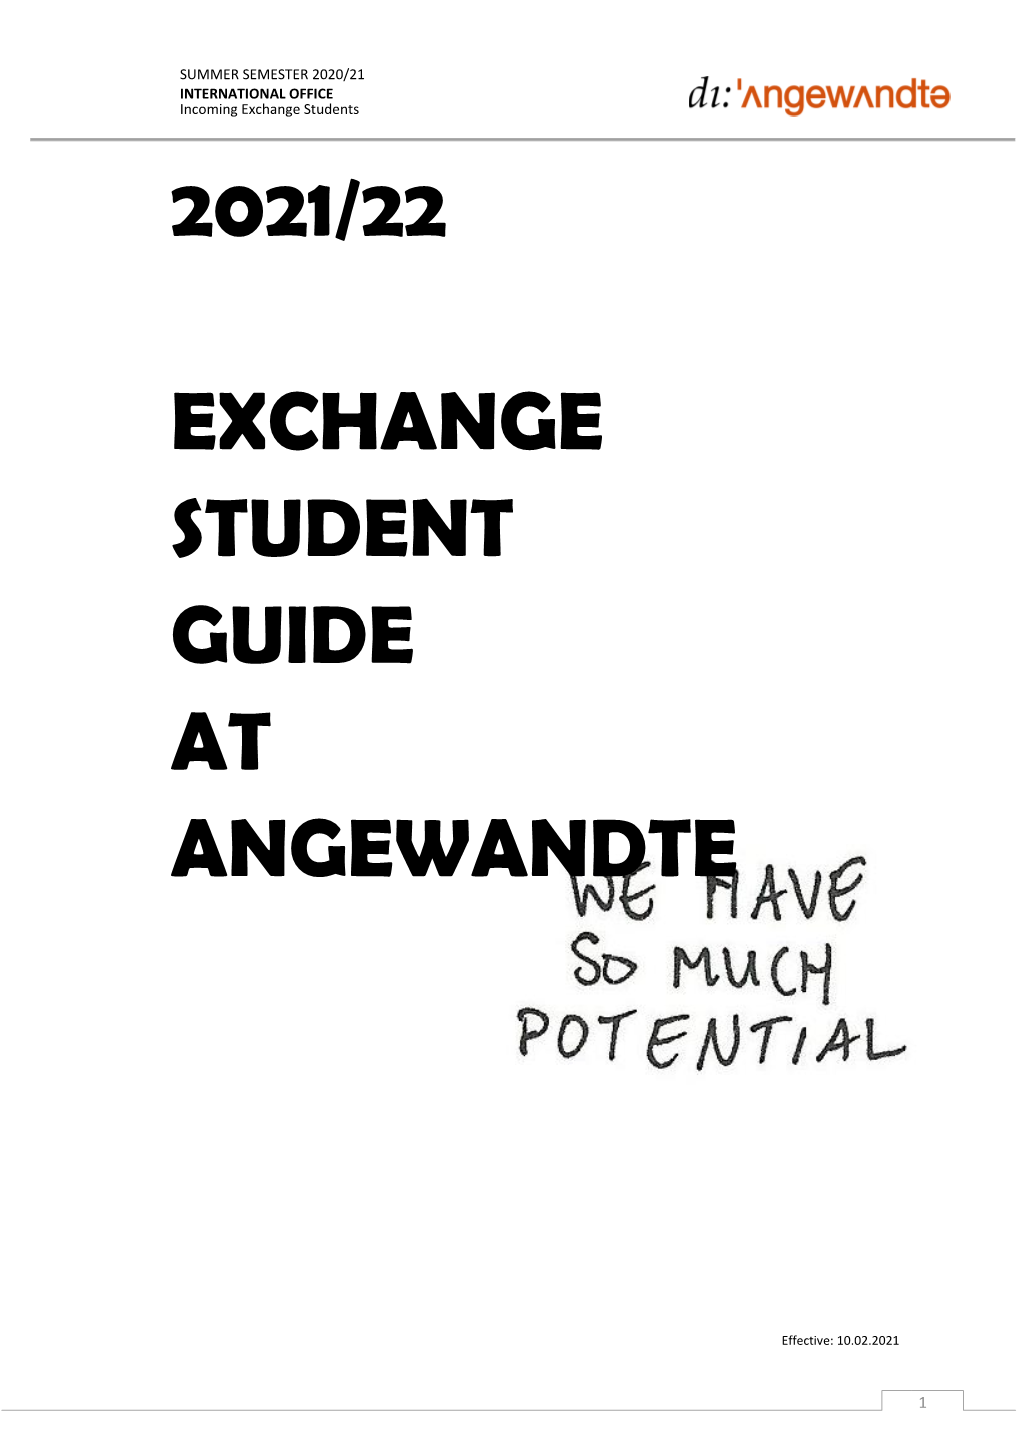 2021/22 Exchange Student Guide at Angewandte